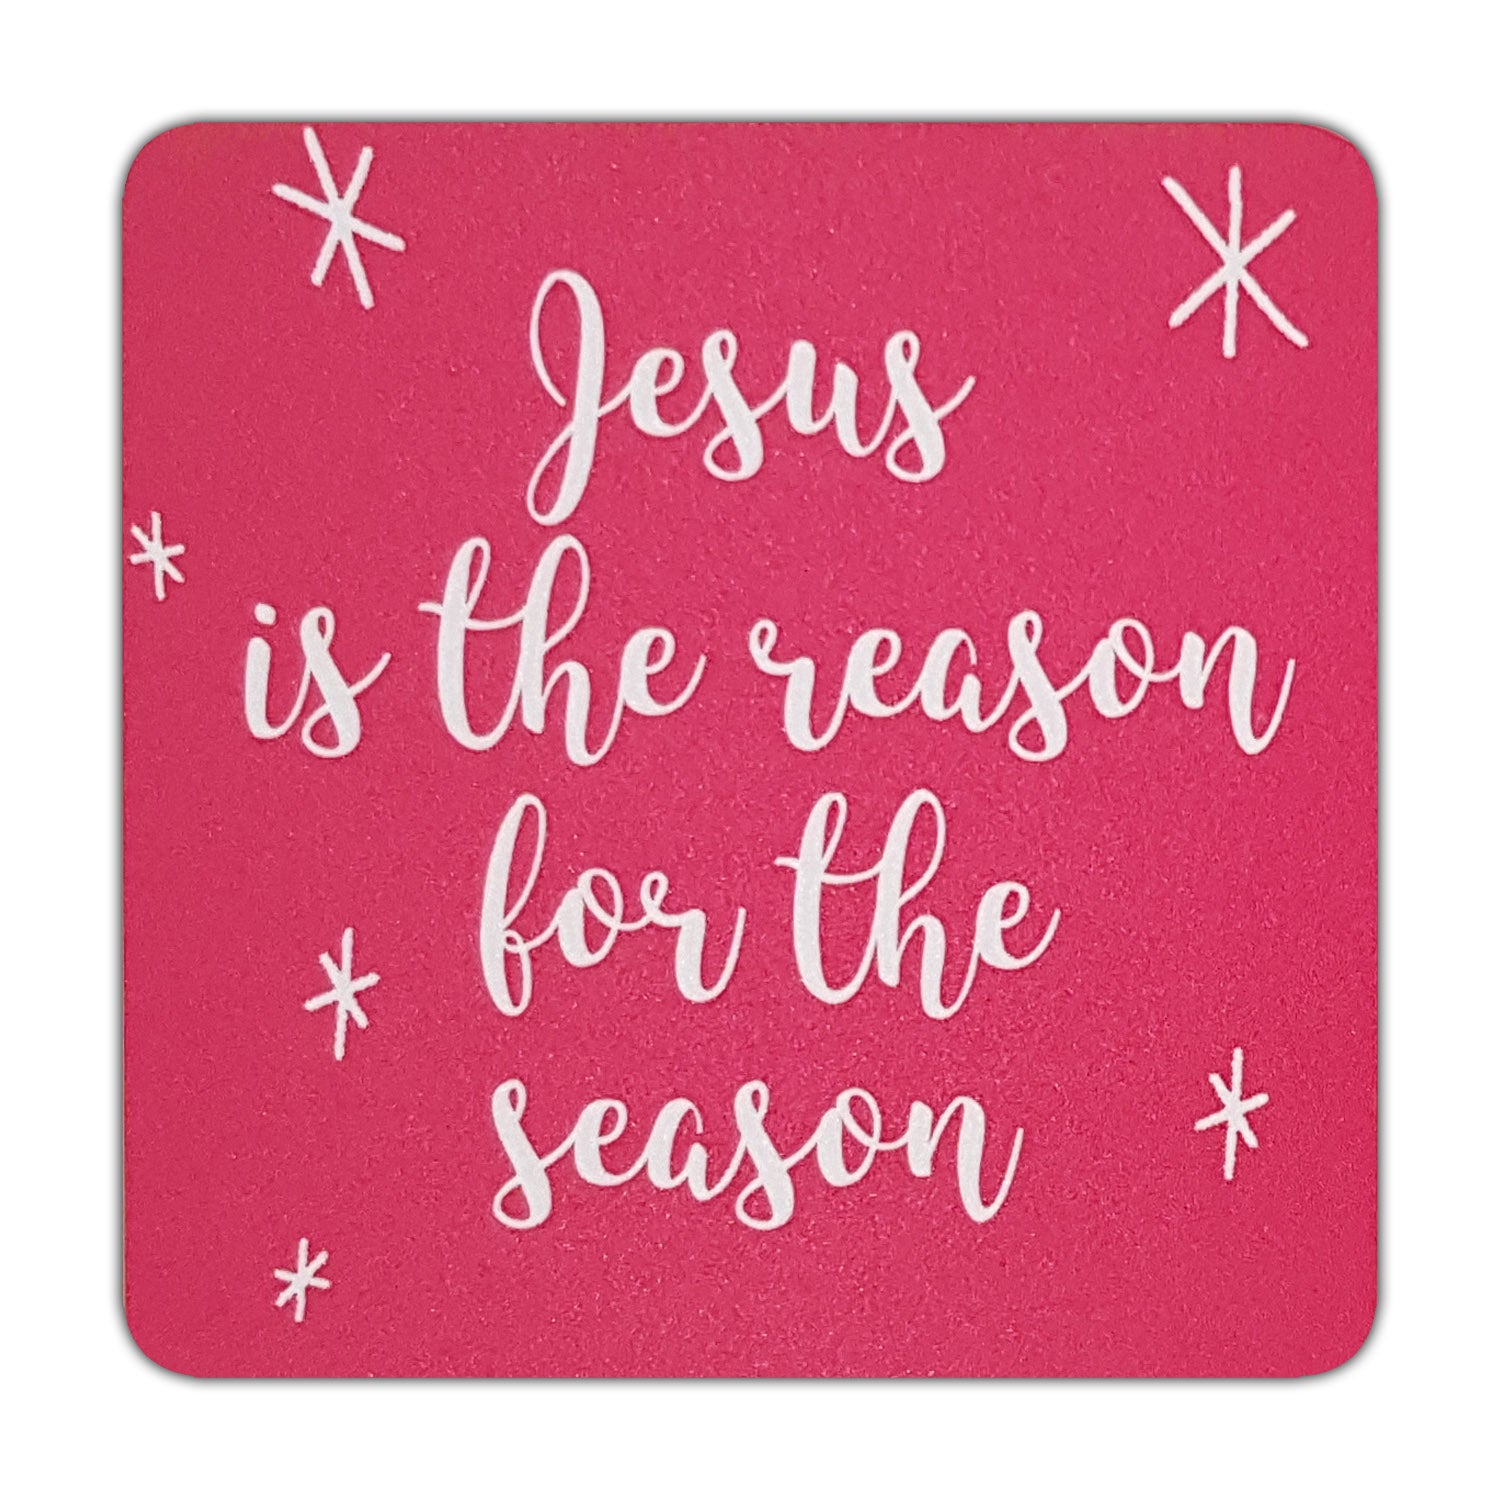 Jesus Is The Reason For The Season Coaster - The Christian Gift Company